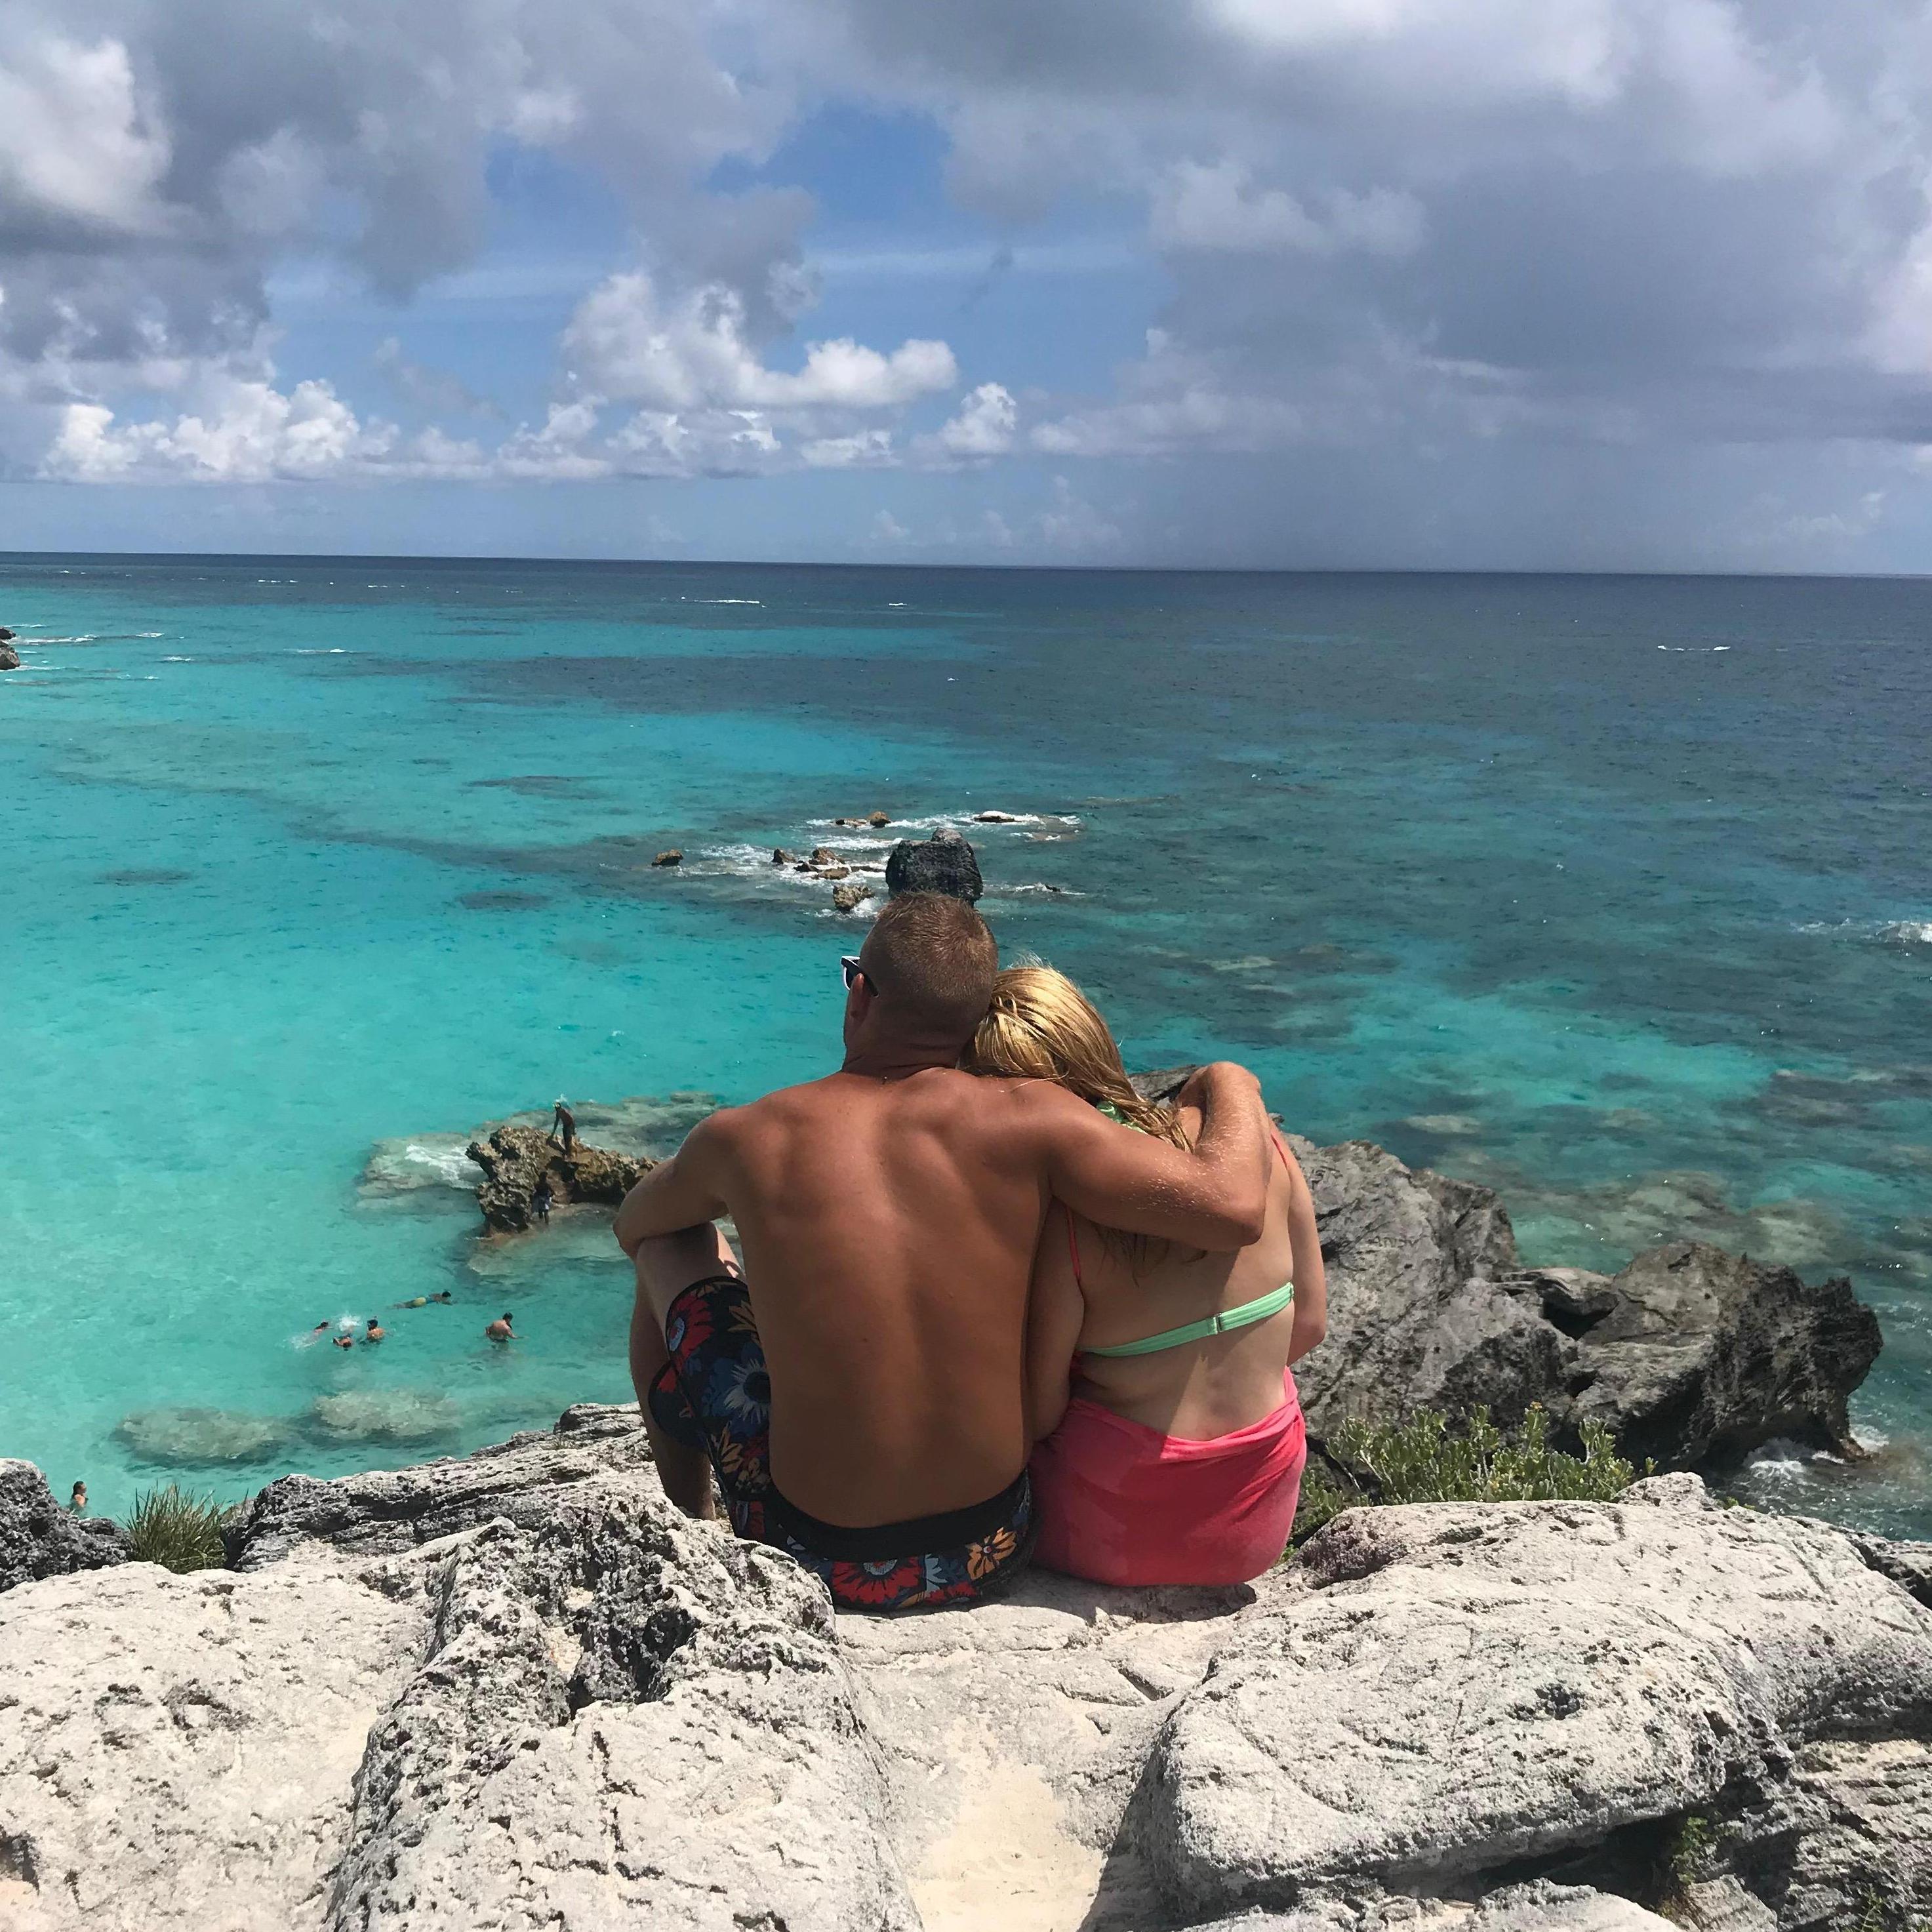 Our First Vacation together
August 2018
Norwegian Escape Cruise- Bermuda